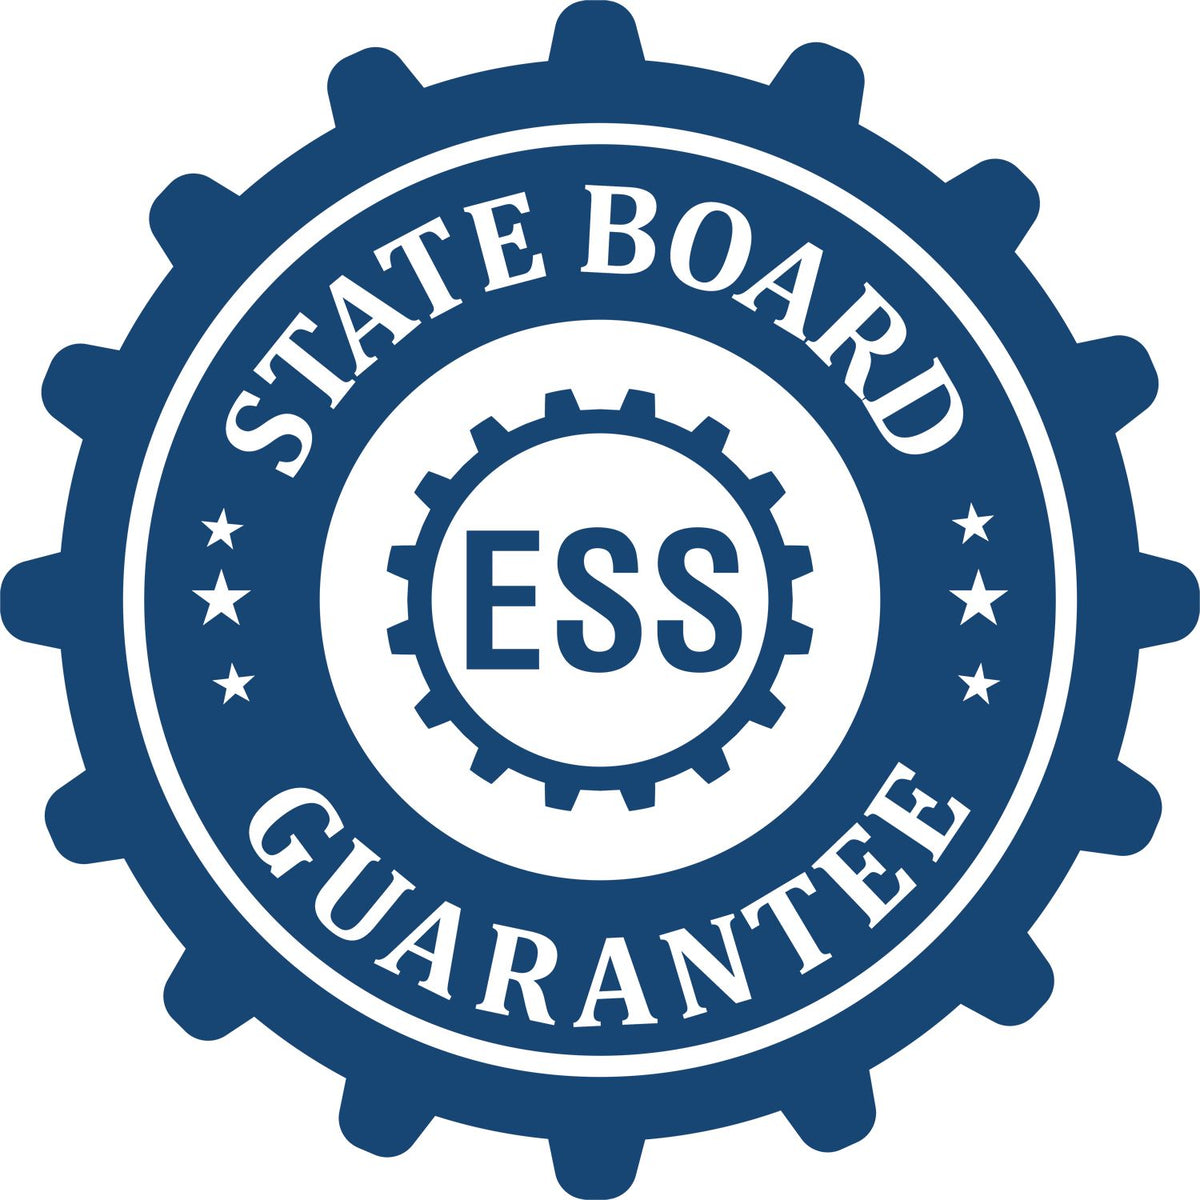 An emblem in a gear shape illustrating a state board guarantee for the Hybrid Wisconsin Geologist Seal